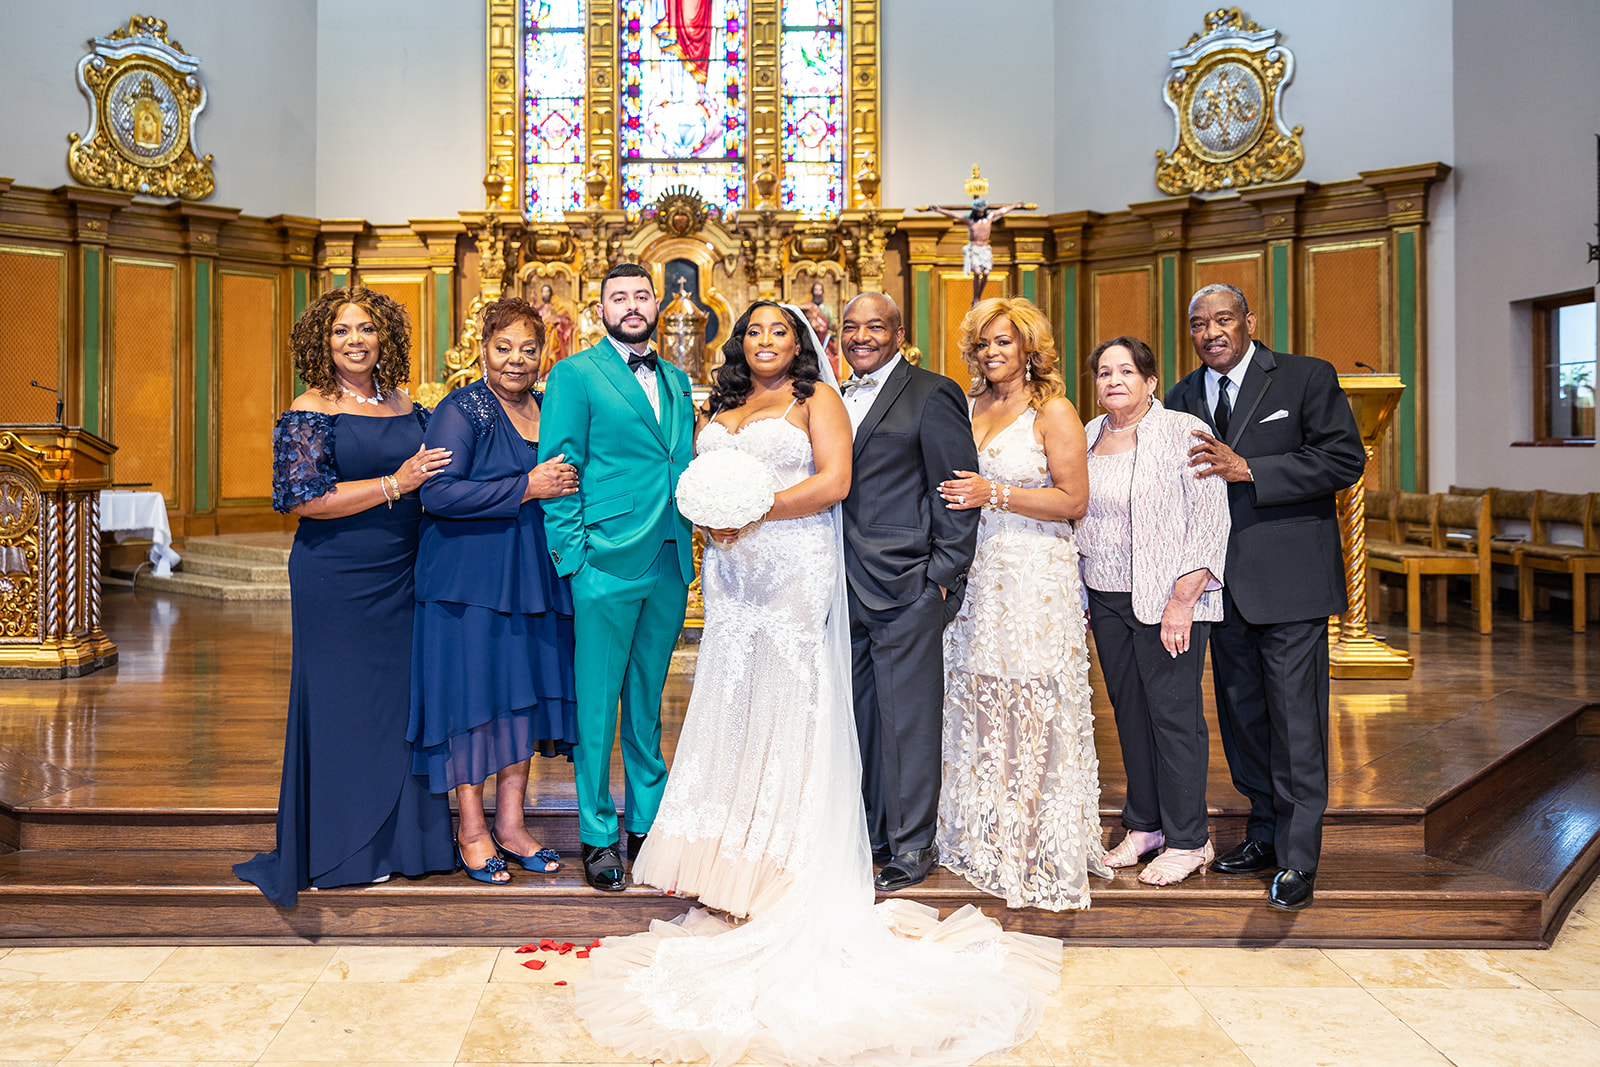 large family portrait at the alter with bride and groom